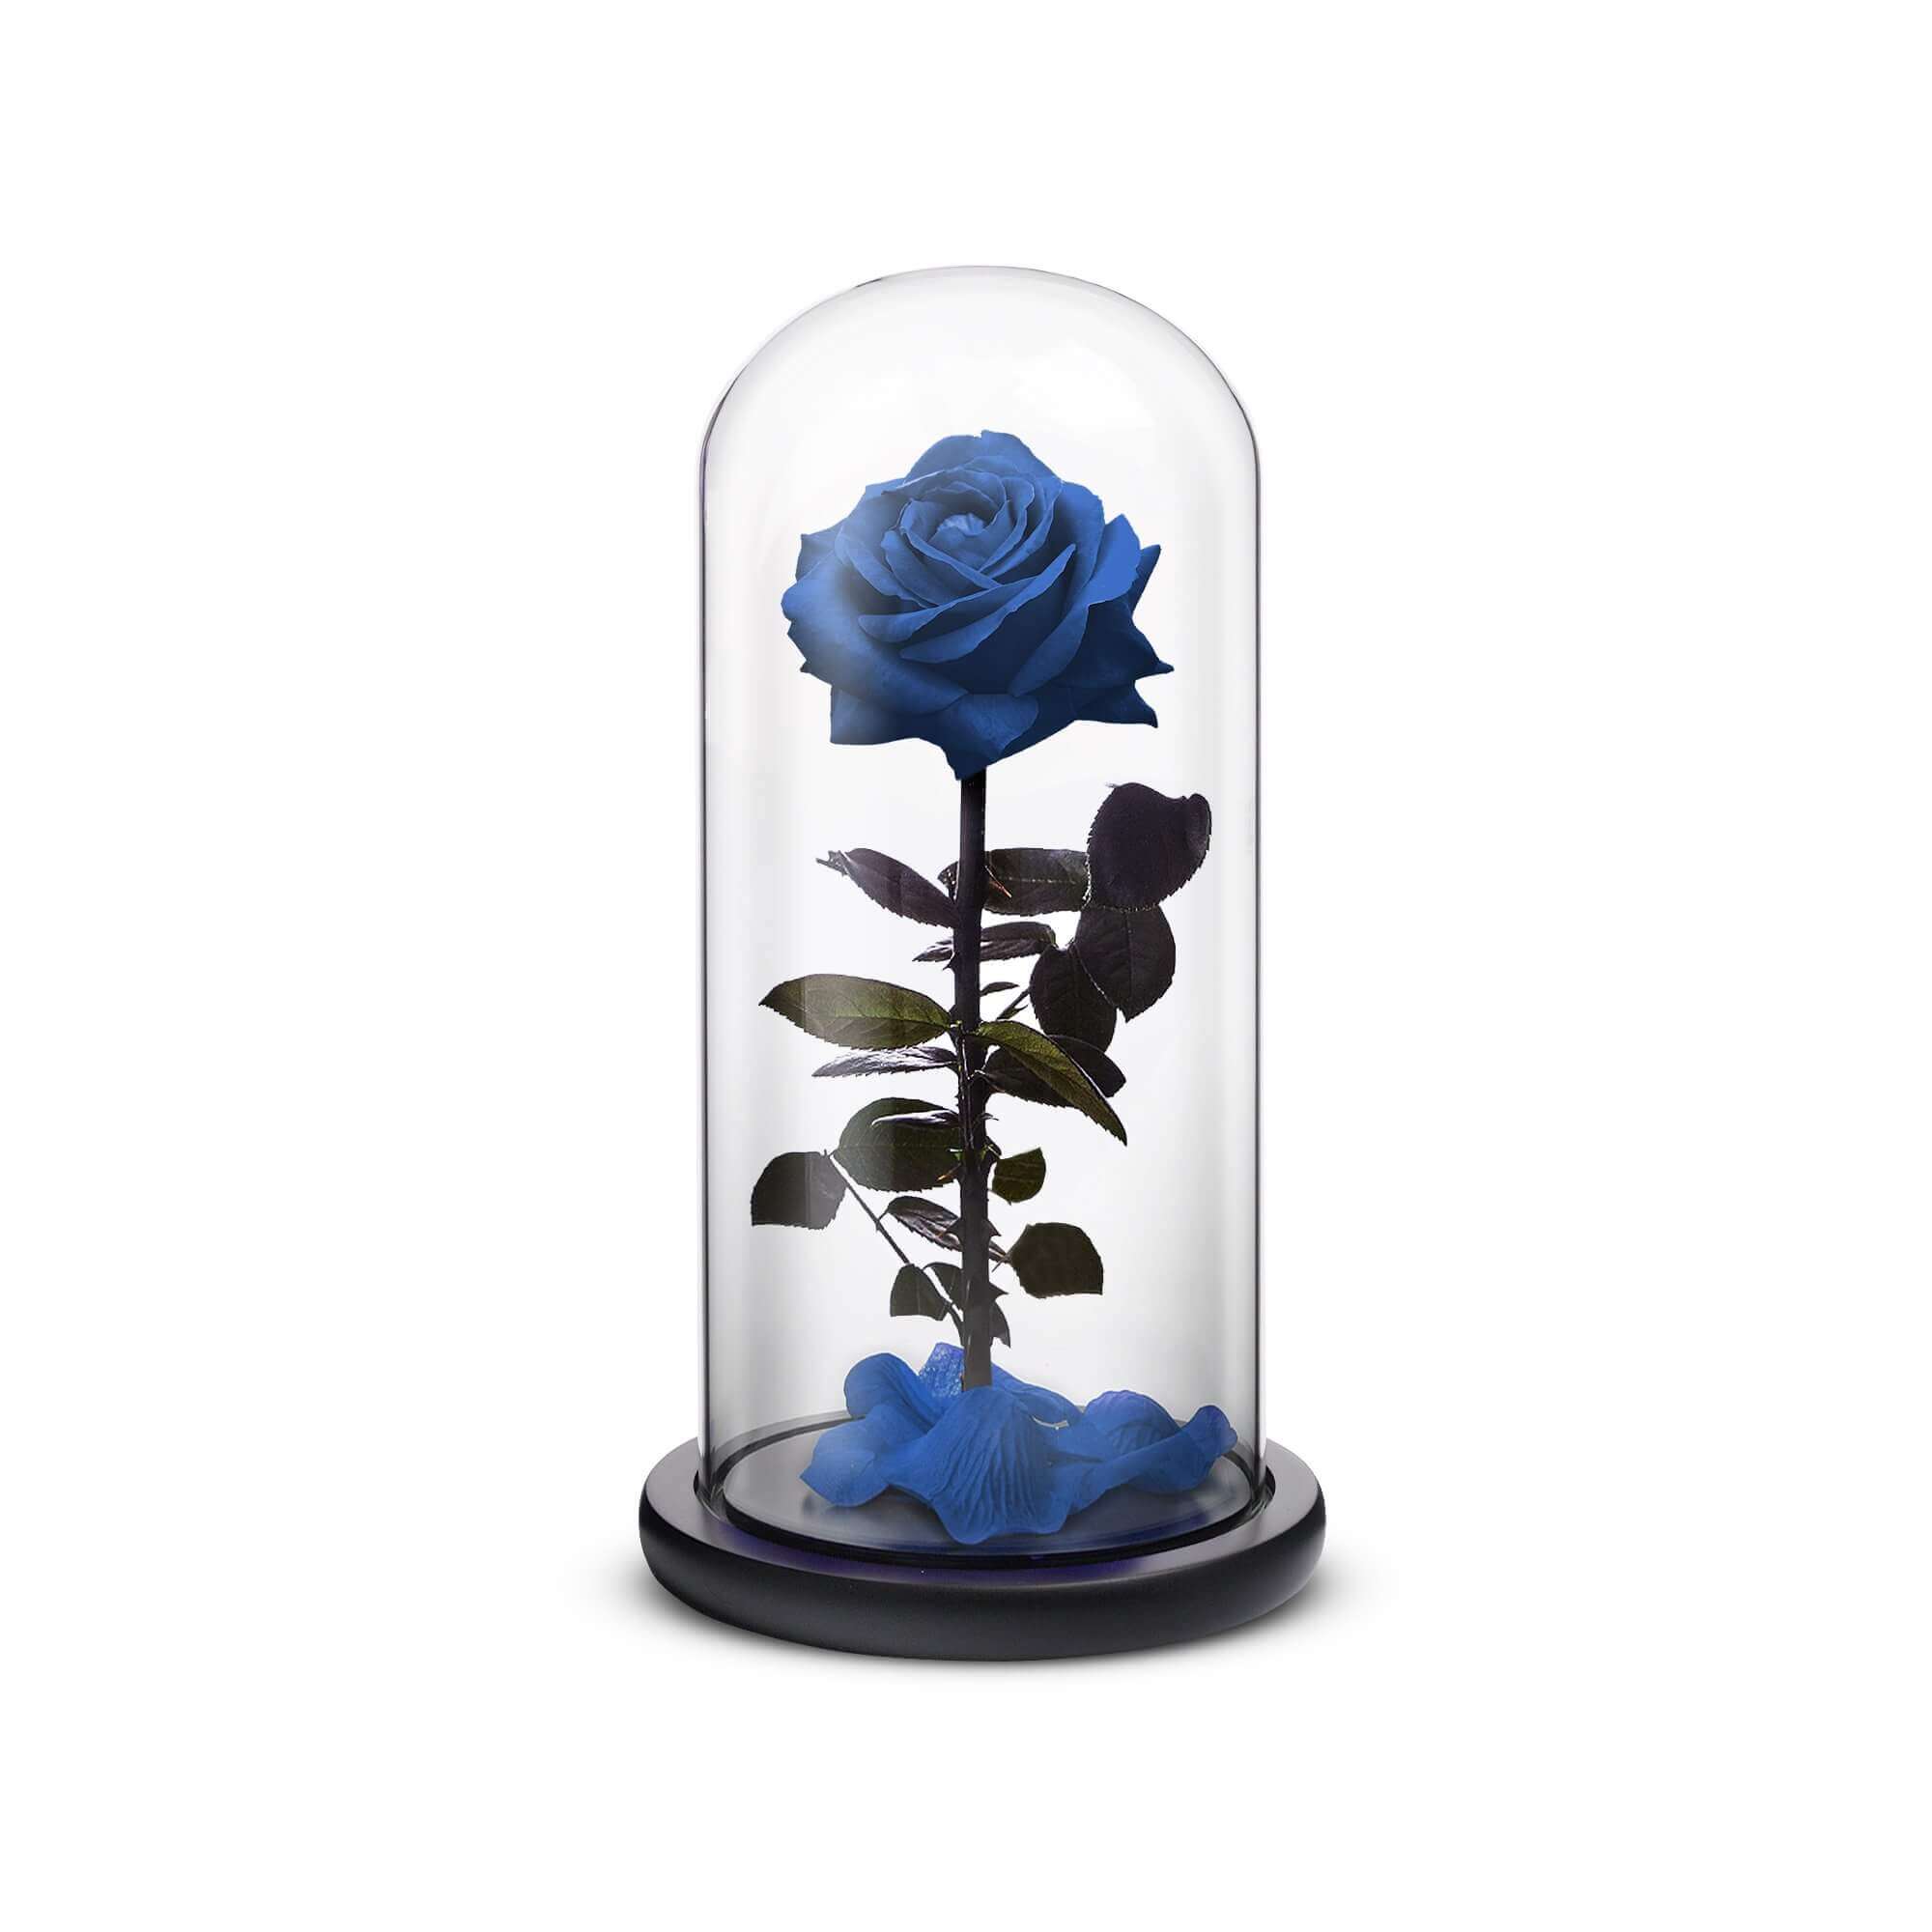 Blue everlasting preserved rose inside a crystal dome and wooden base